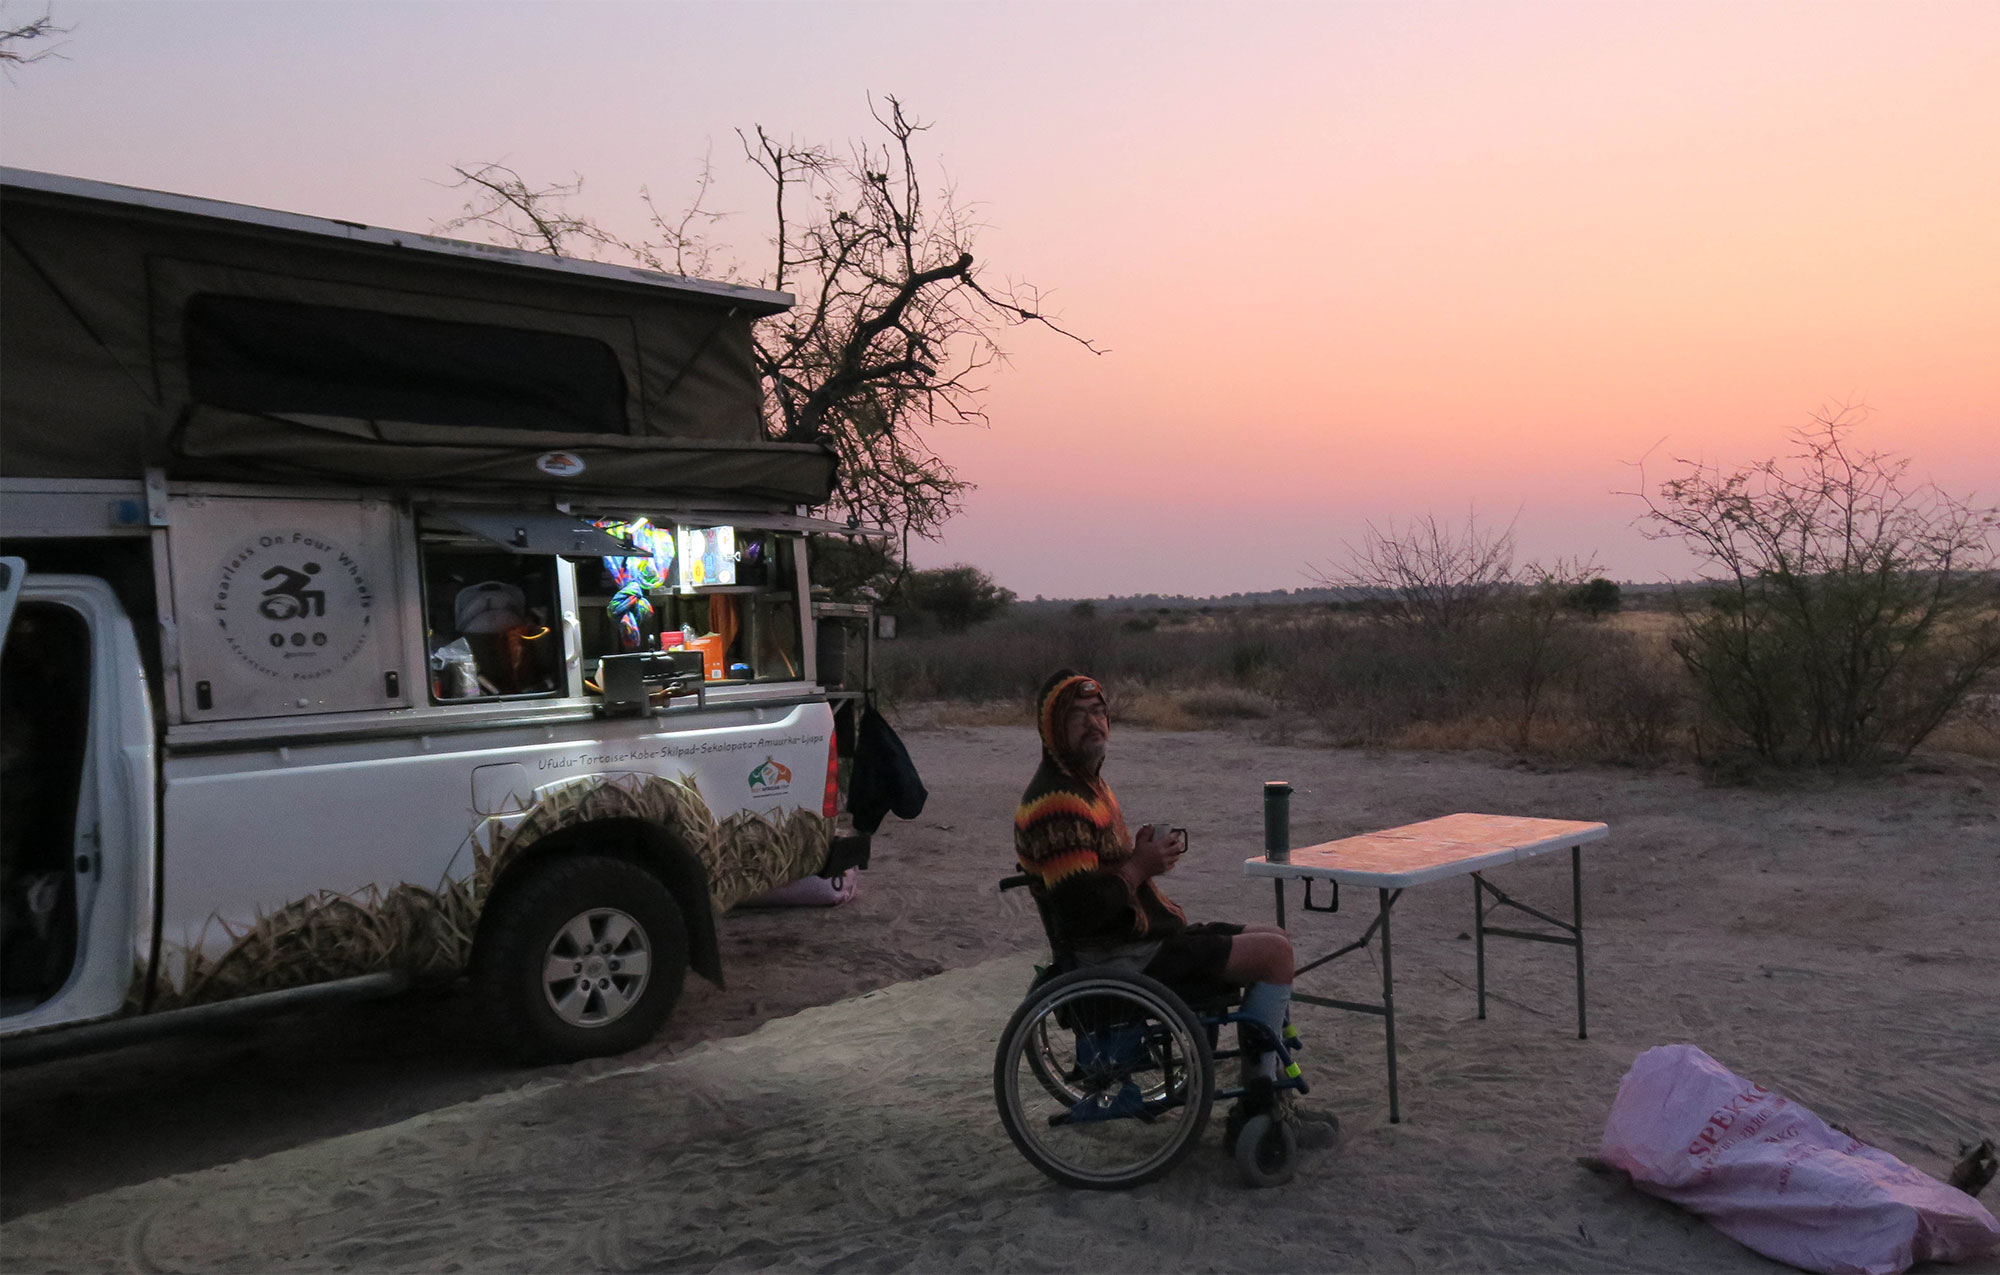 Man is in a wheel chair in an epic road trip voyage. He is seen at sunset in a wheelchair drinking water near his accessible van.